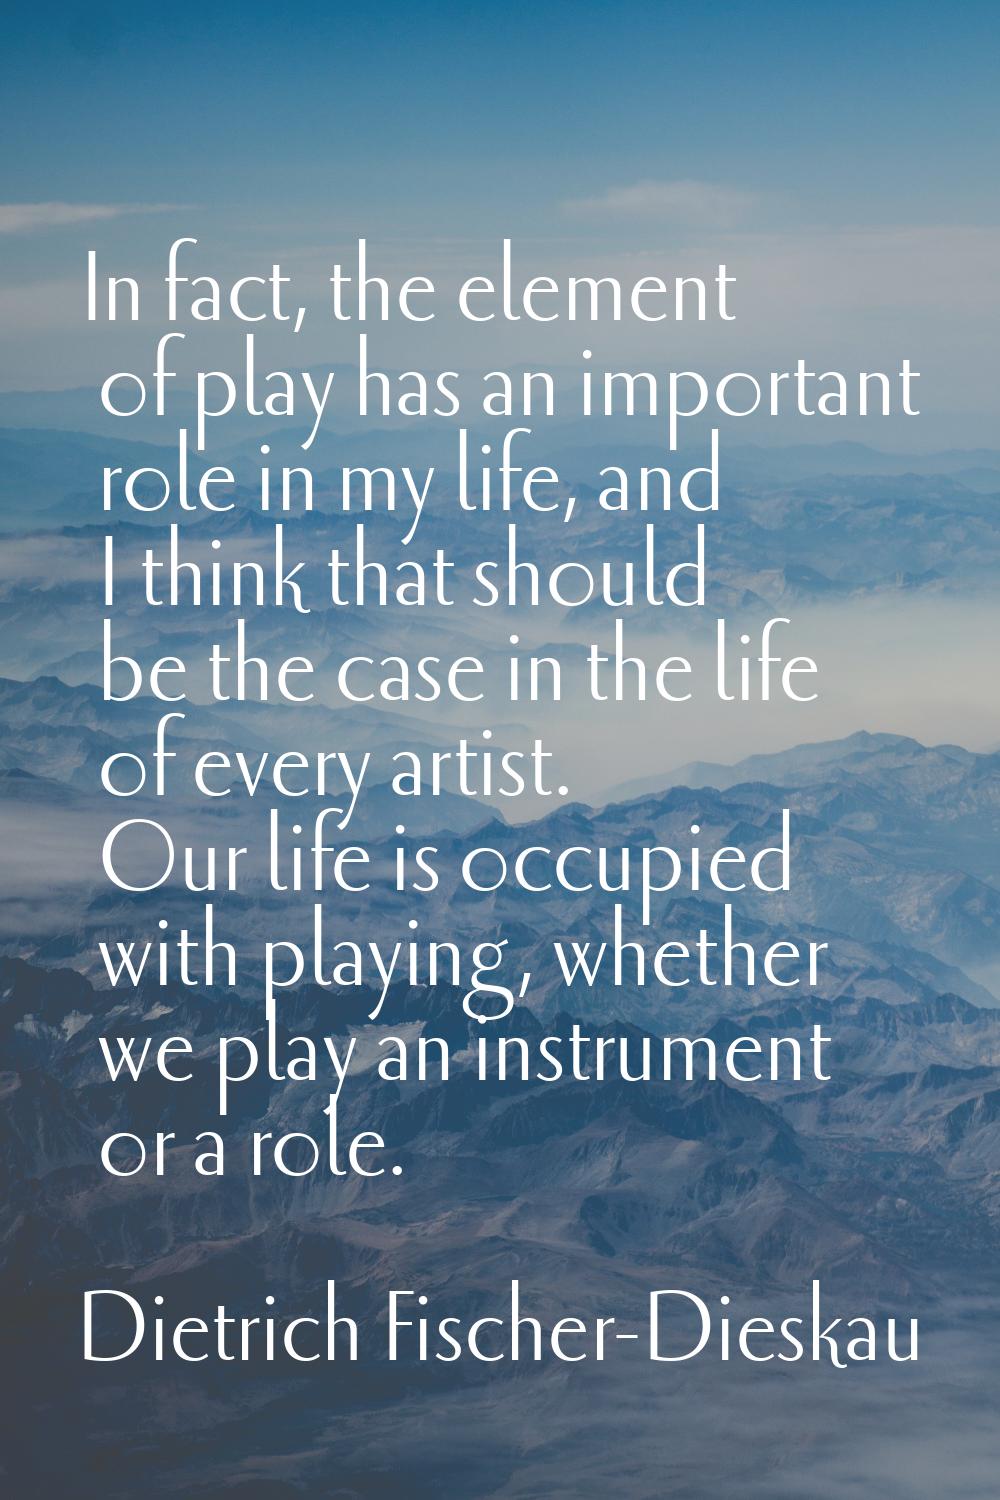 In fact, the element of play has an important role in my life, and I think that should be the case 